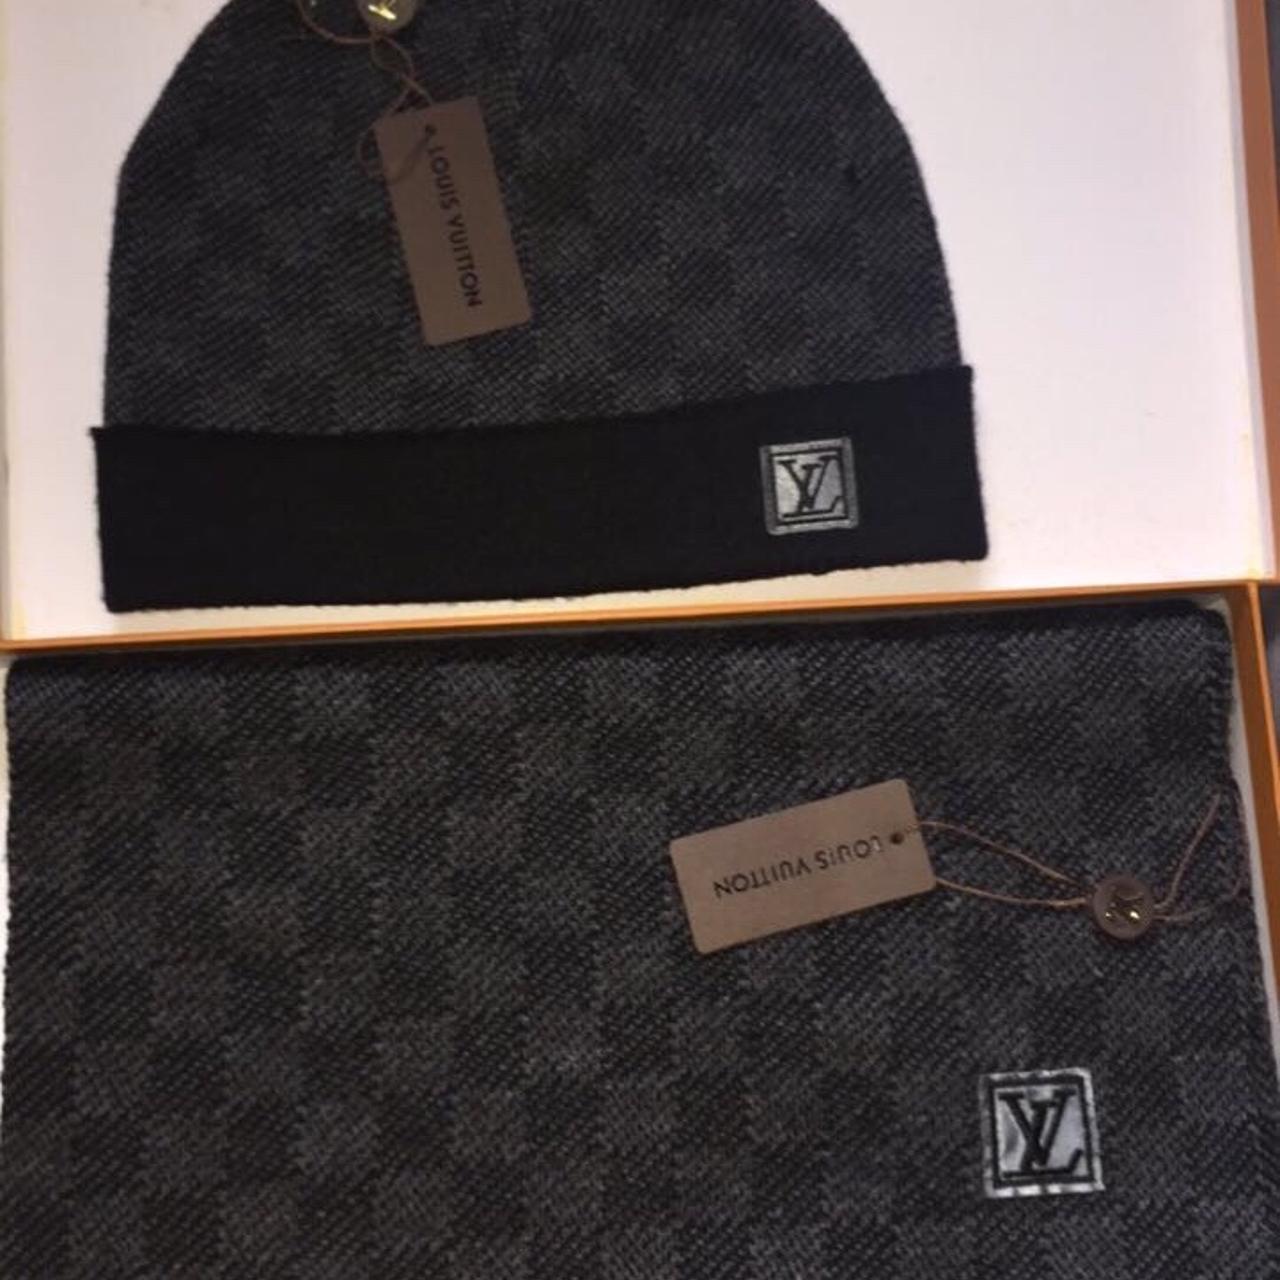 Louis Vuitton hat and scarf set brand new got